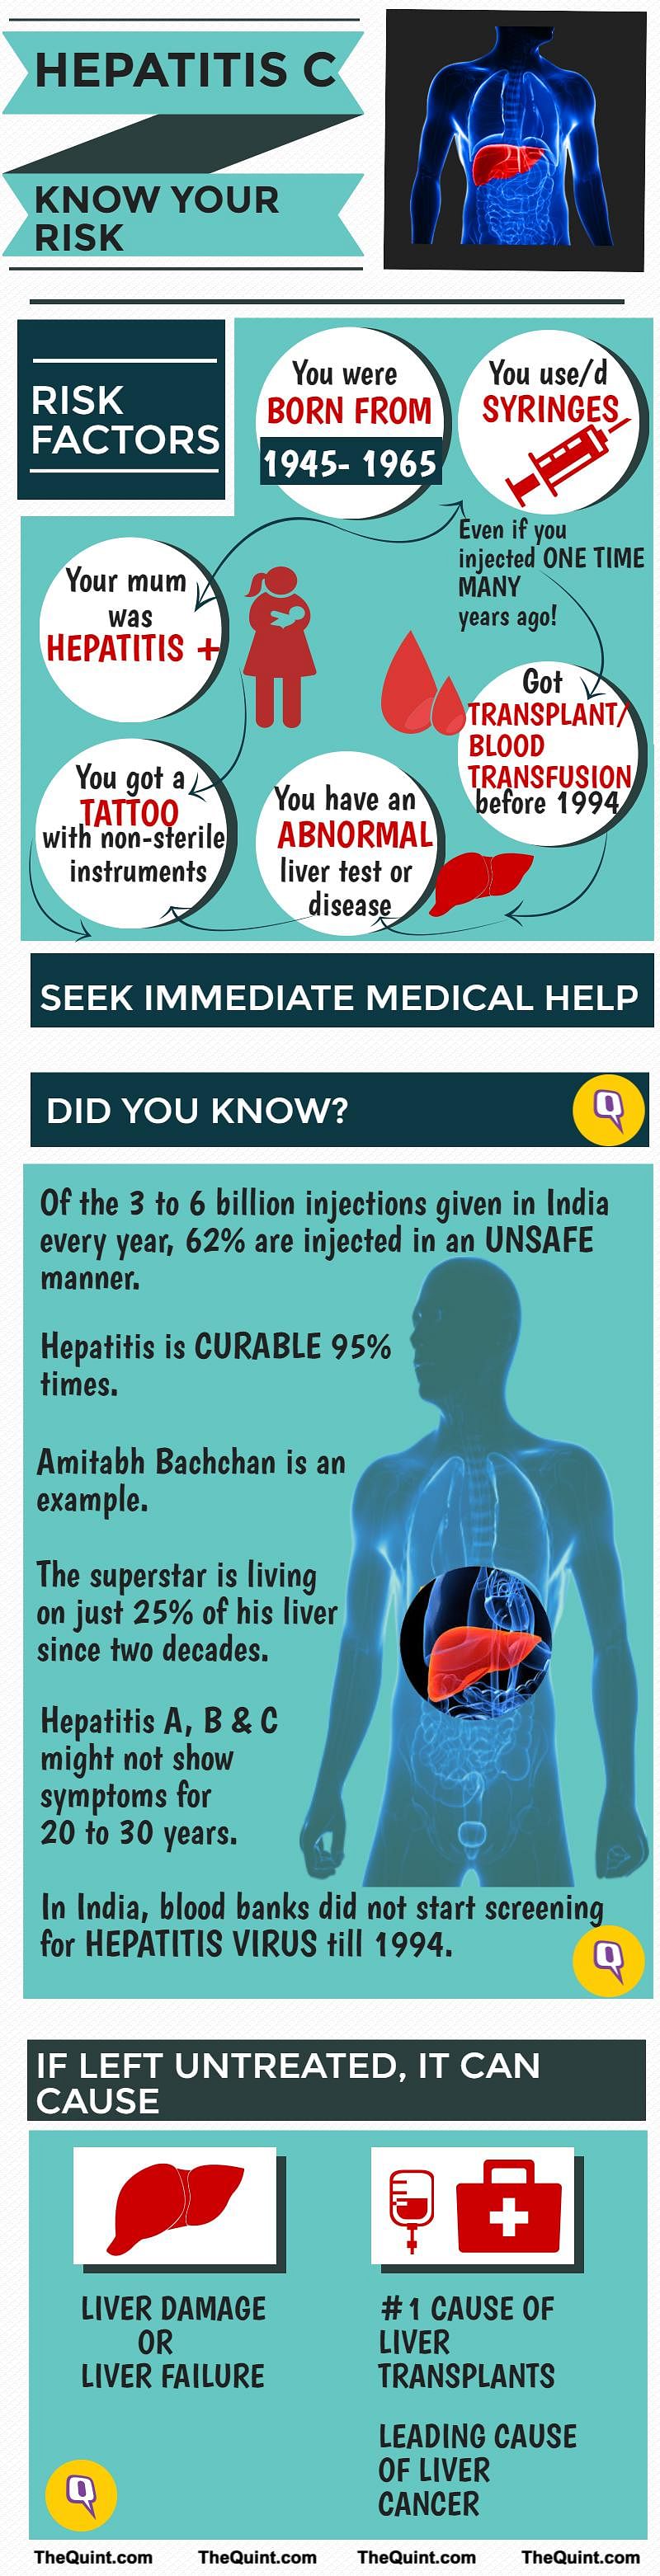 Hepatitis kills over 1 lakh people yearly; it is 3 times more infectious than HIV. How much do you know about it?